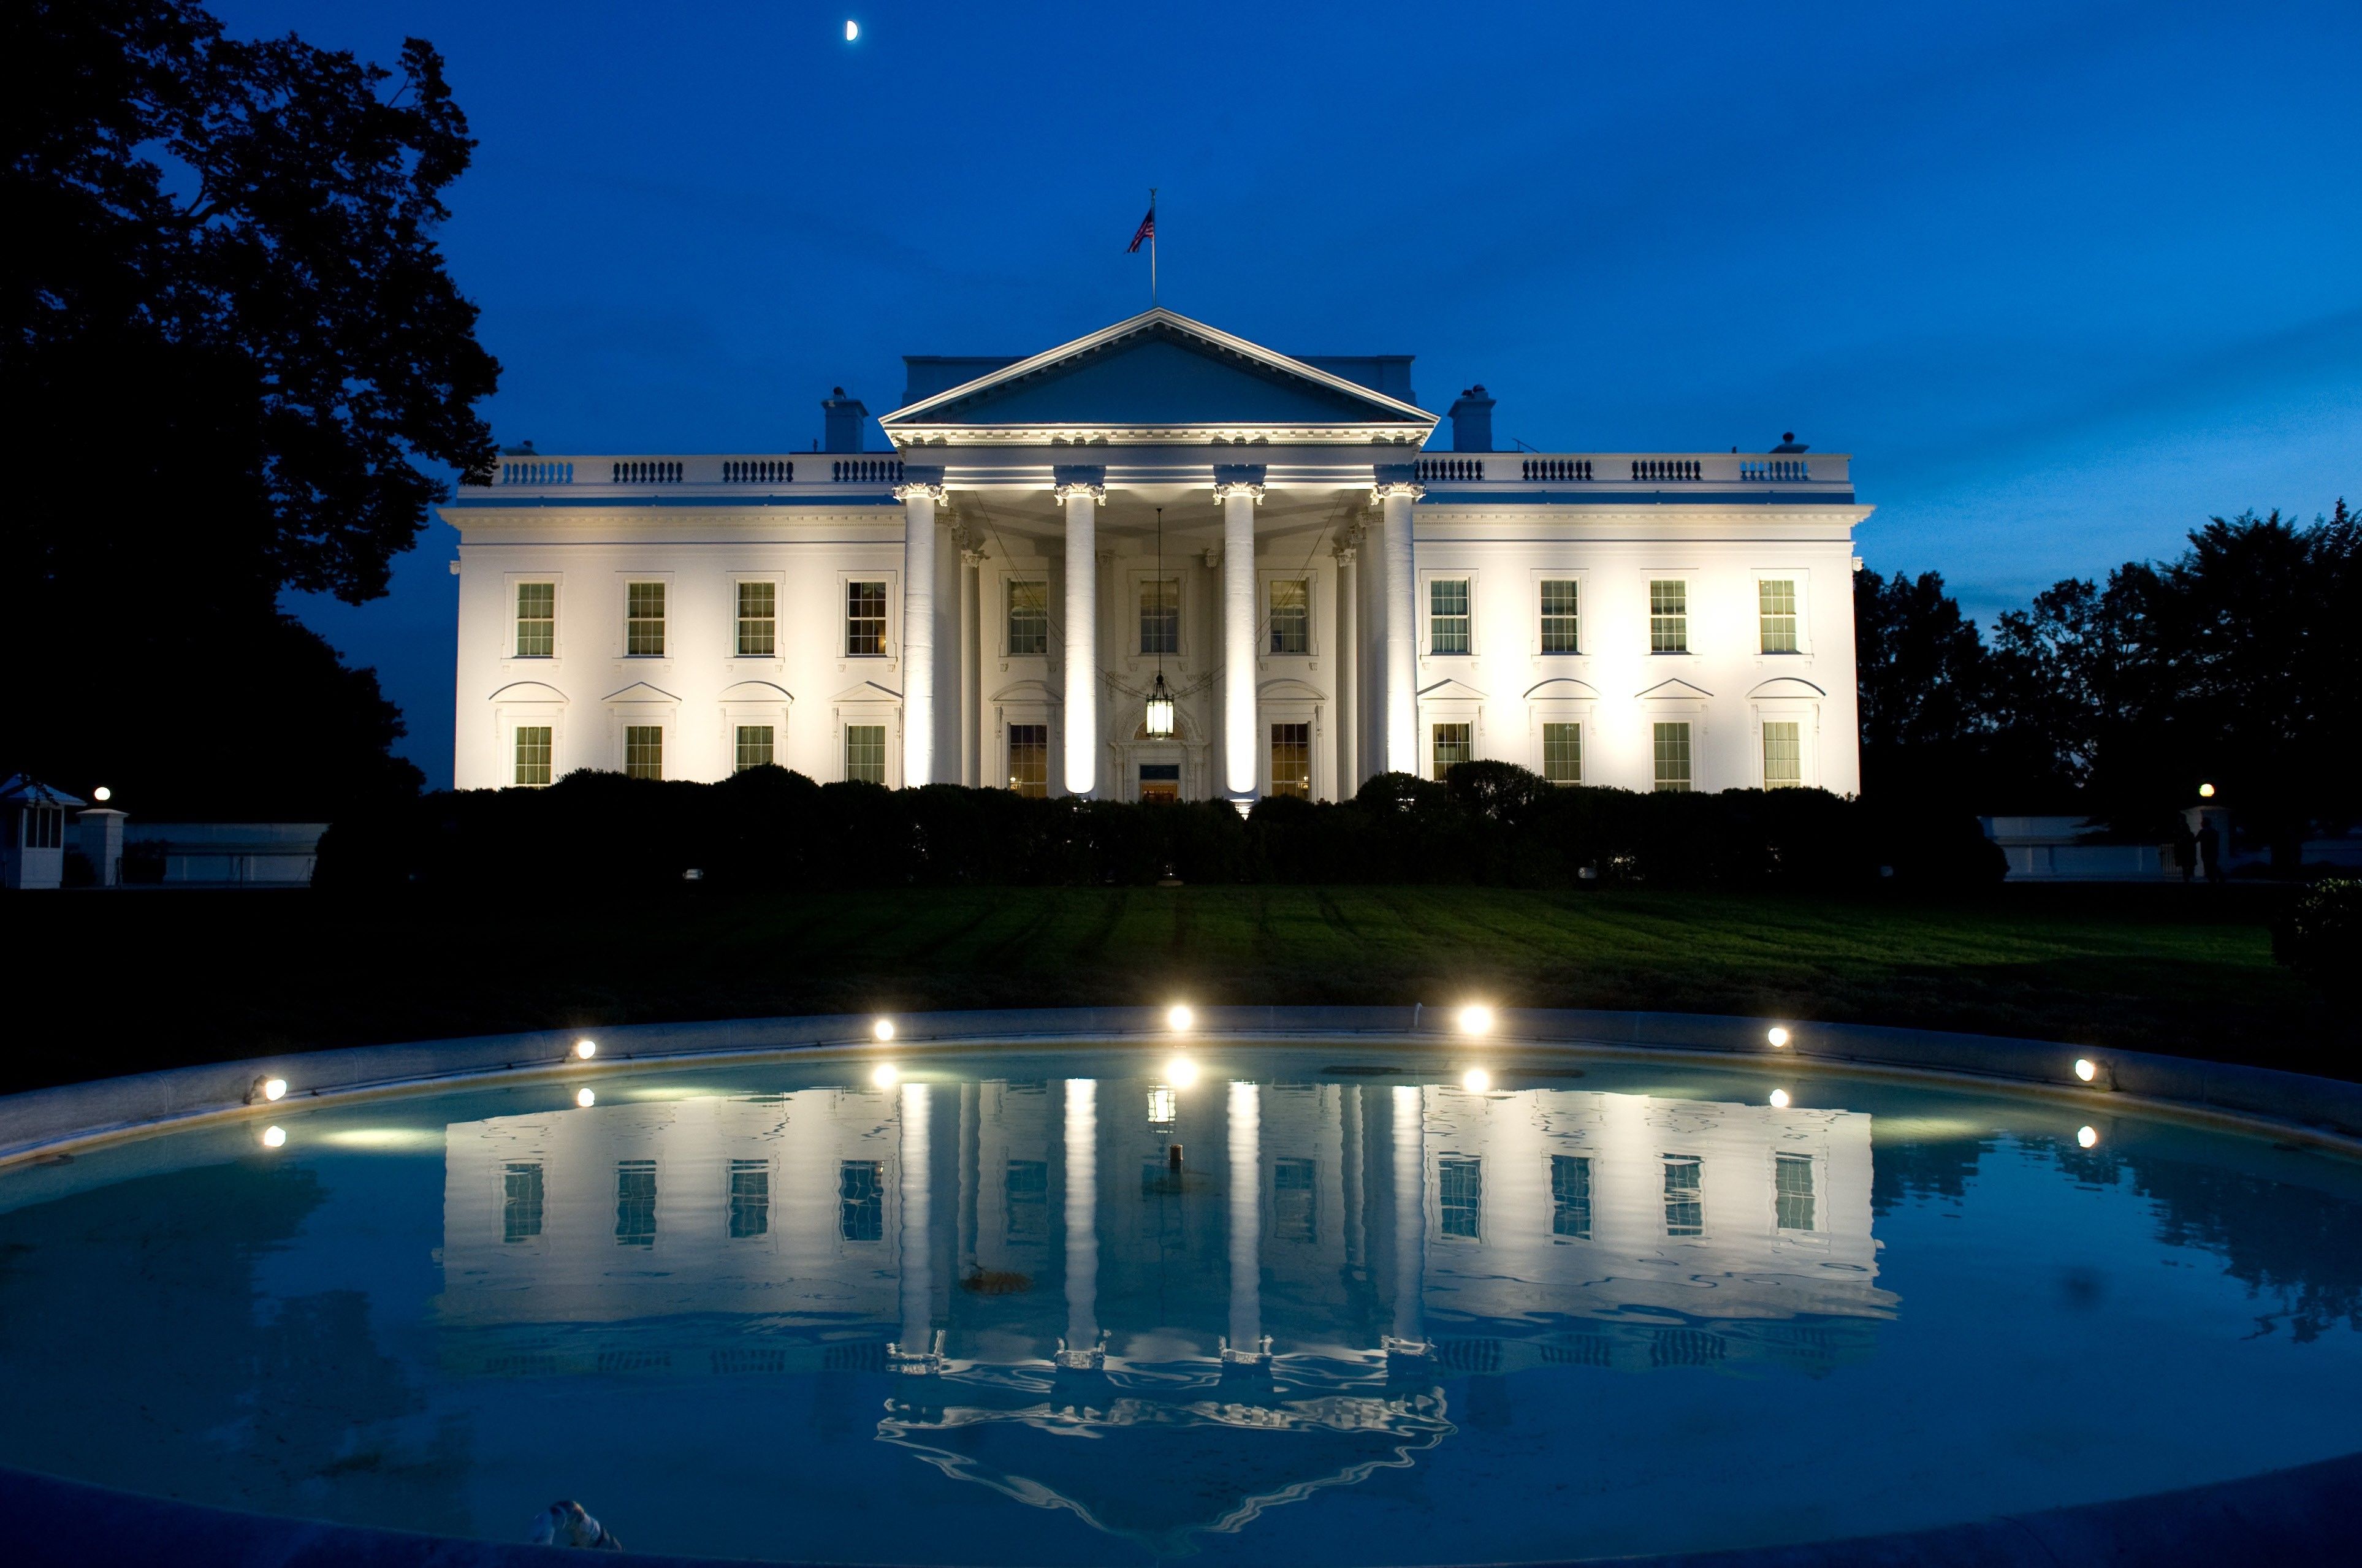 White House Address and Contact Information